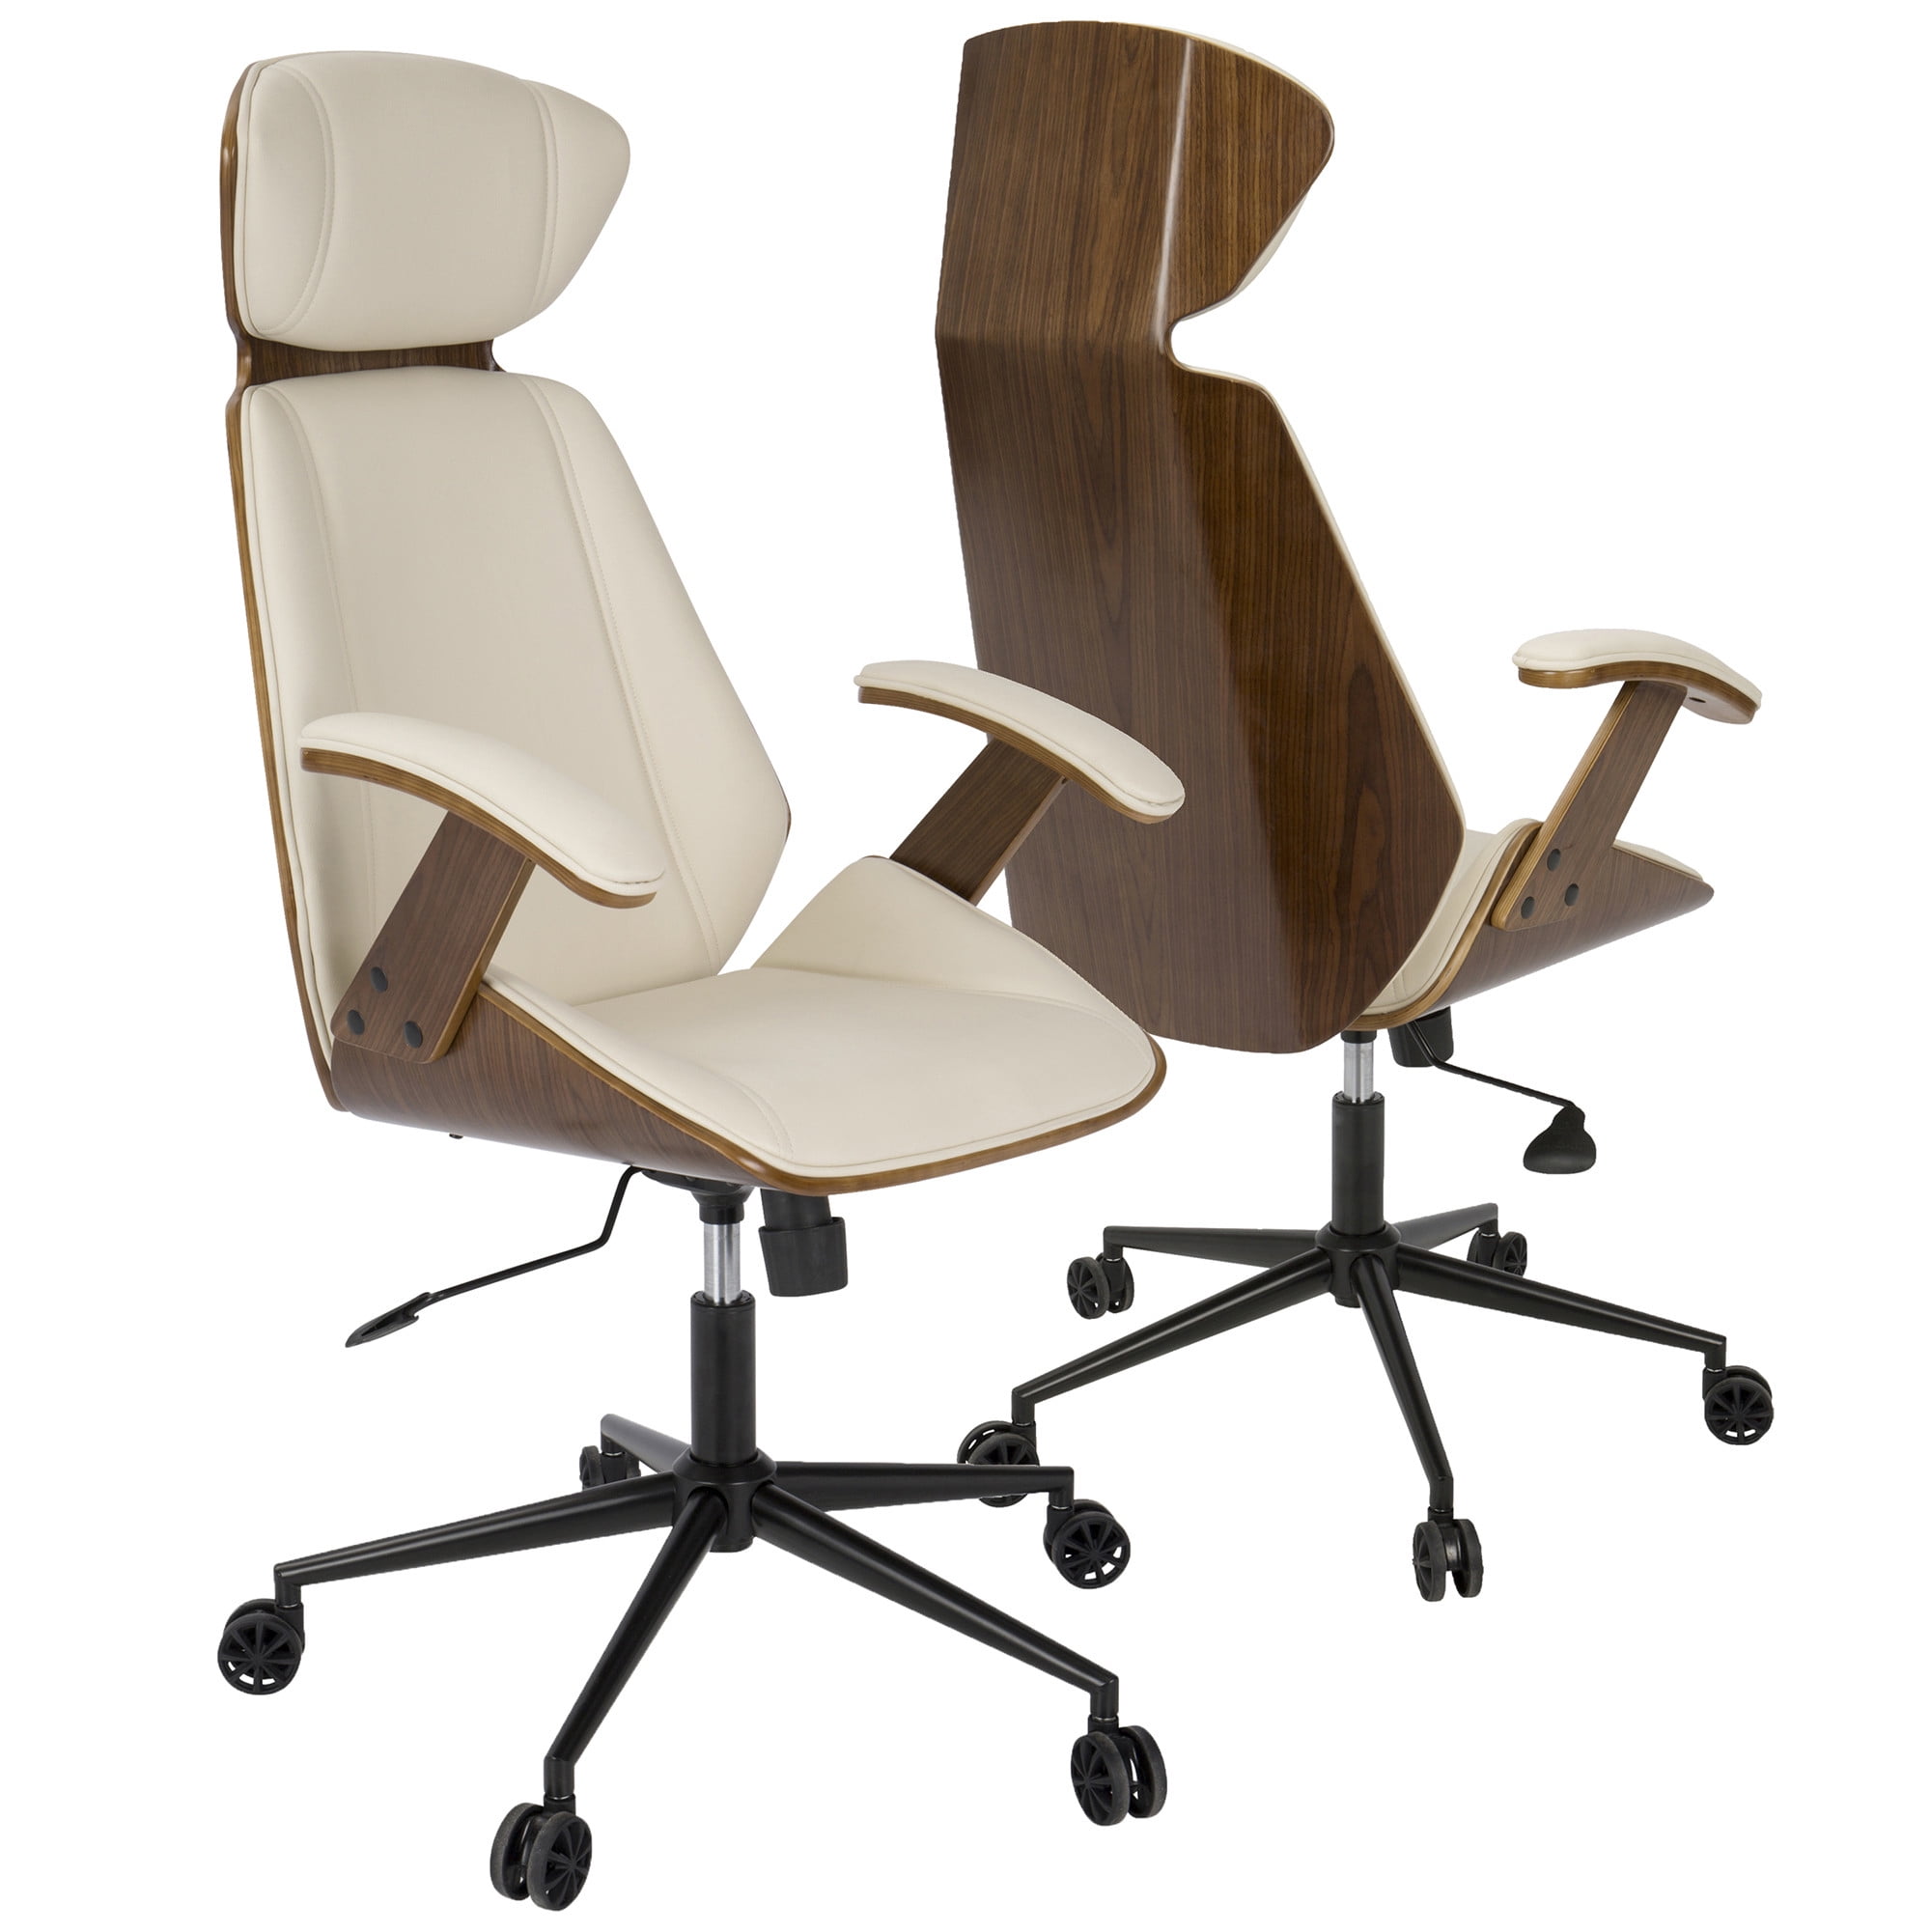 Adjustable Office Chair In Walnut Wood, Cream Office Chair Faux Leather